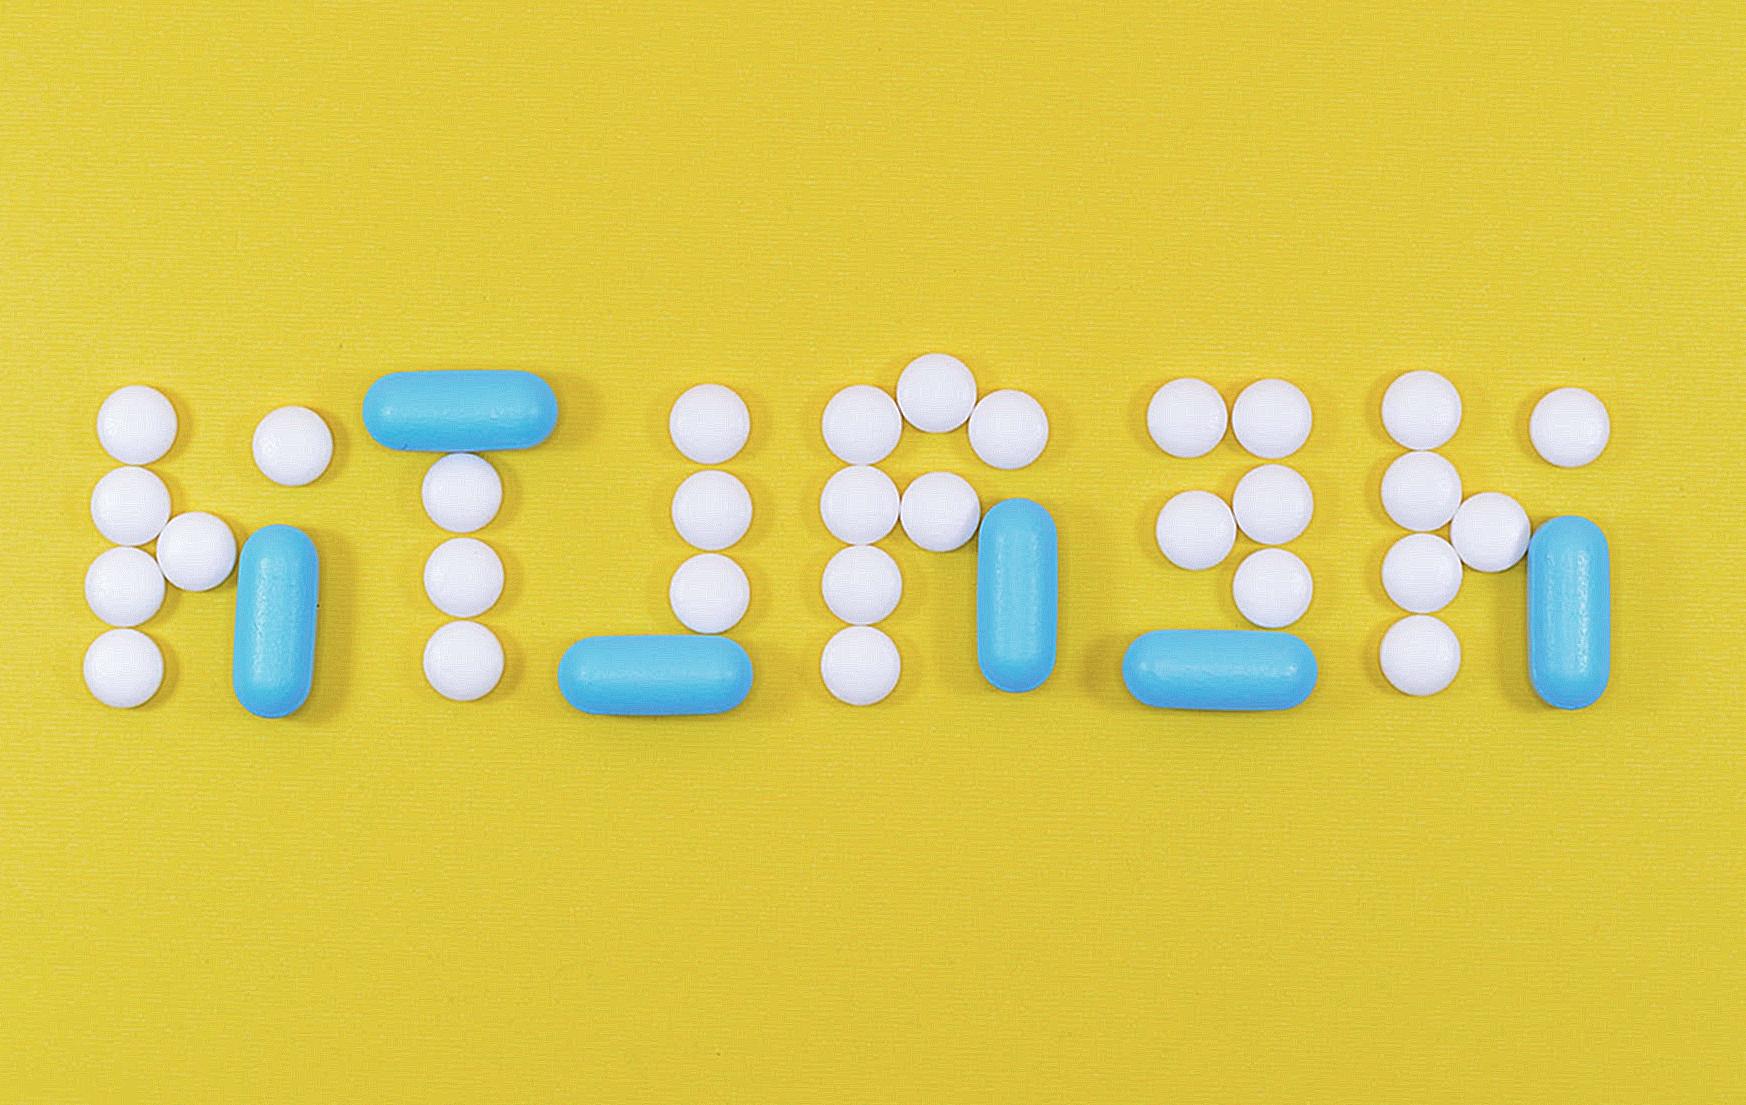 White and Blue Health Pill and Tablet Letter Cutout on Yellow Surface